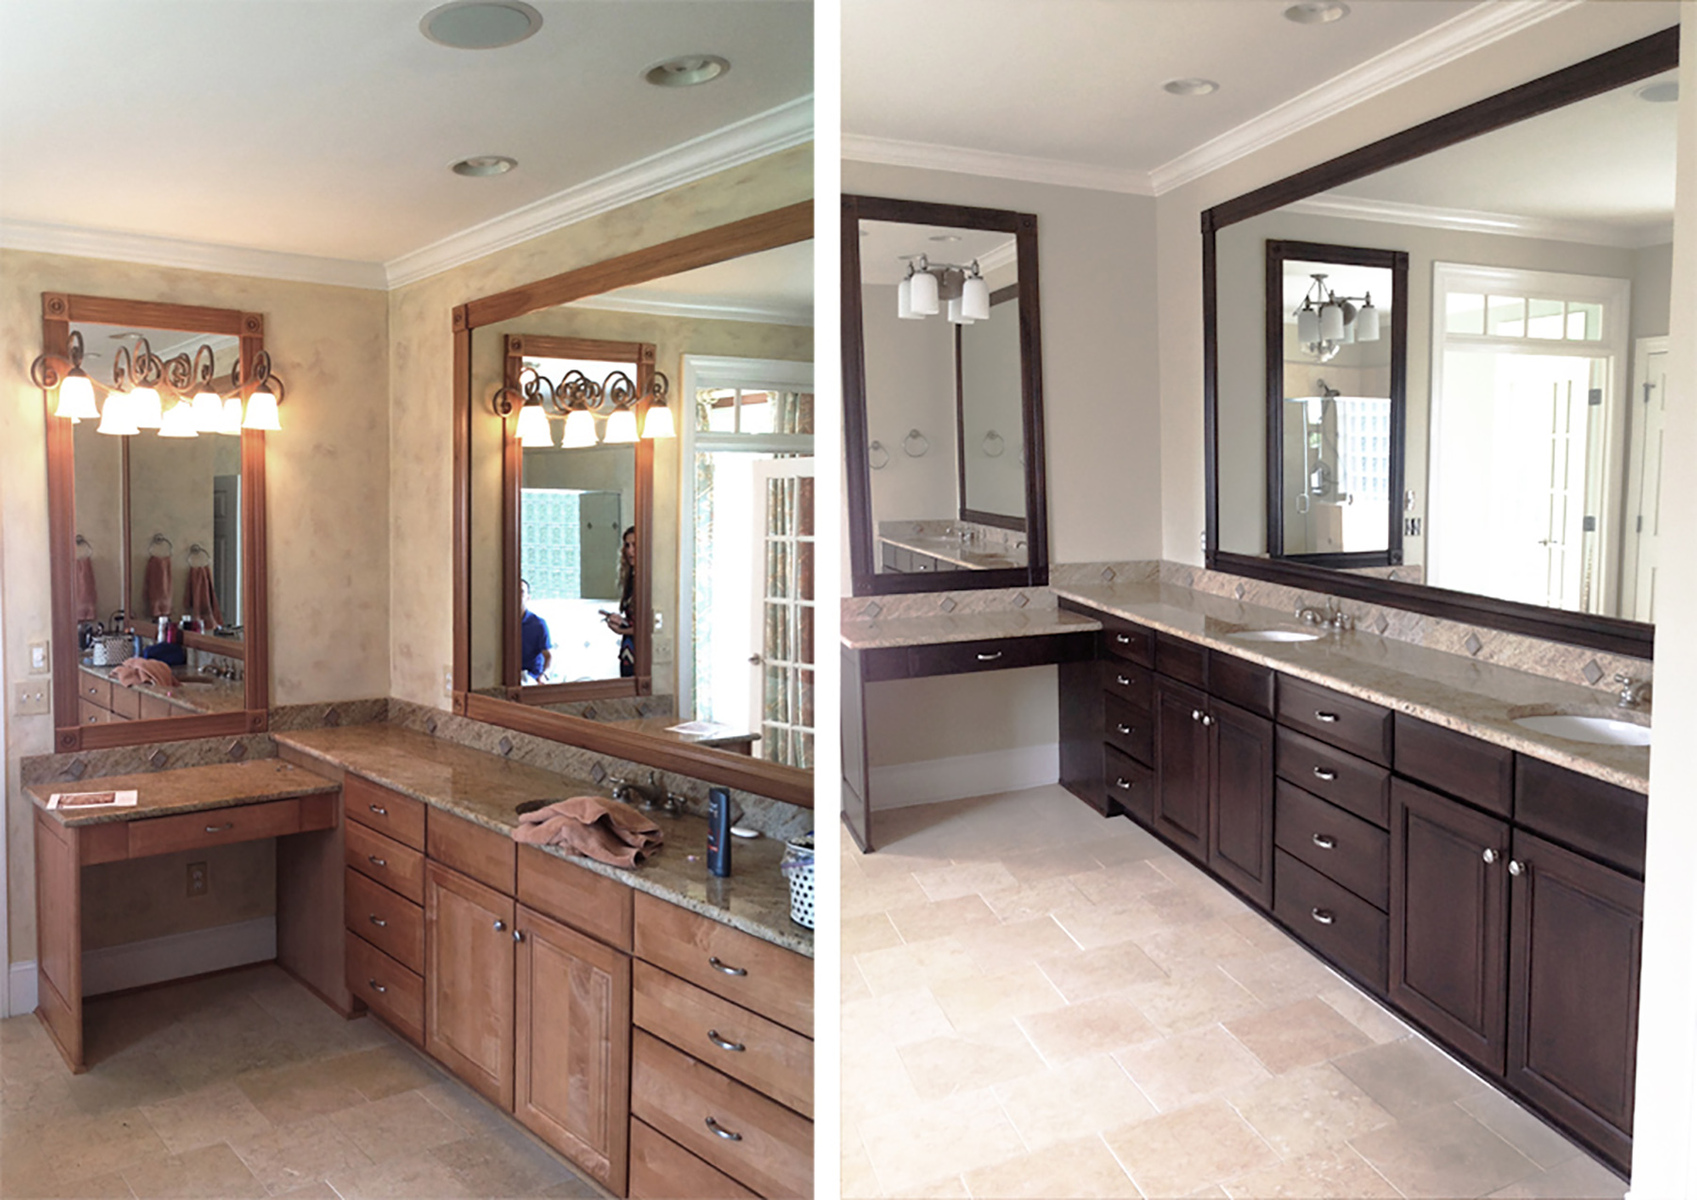 Before and After - master bathroom cabinet makeover in faux mahogany wood glaze.